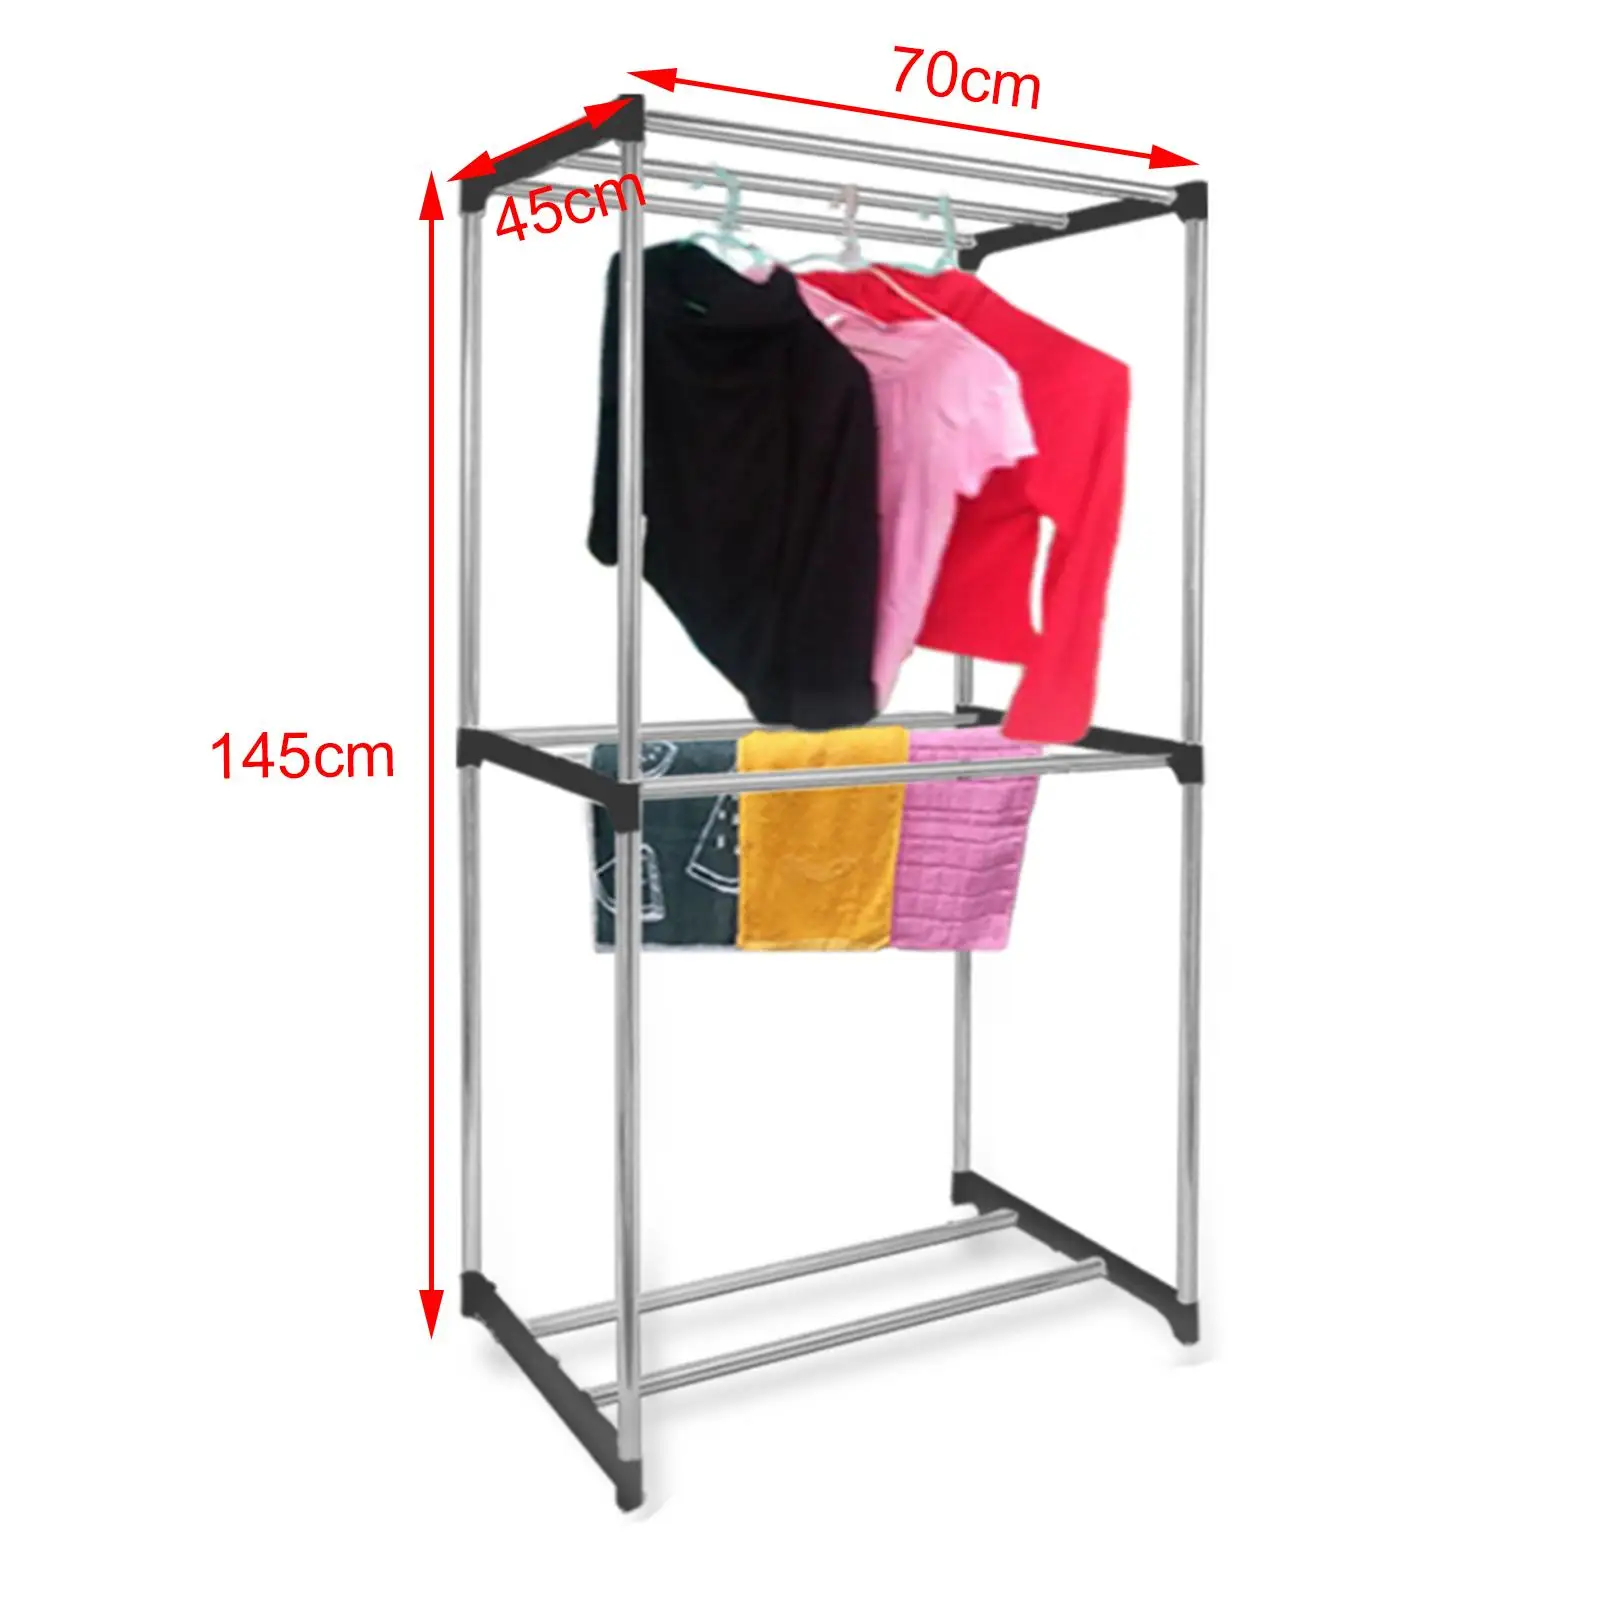 Clothes Drying Rack Laundry Garment Dryer Stand for Laundry Room Balcony